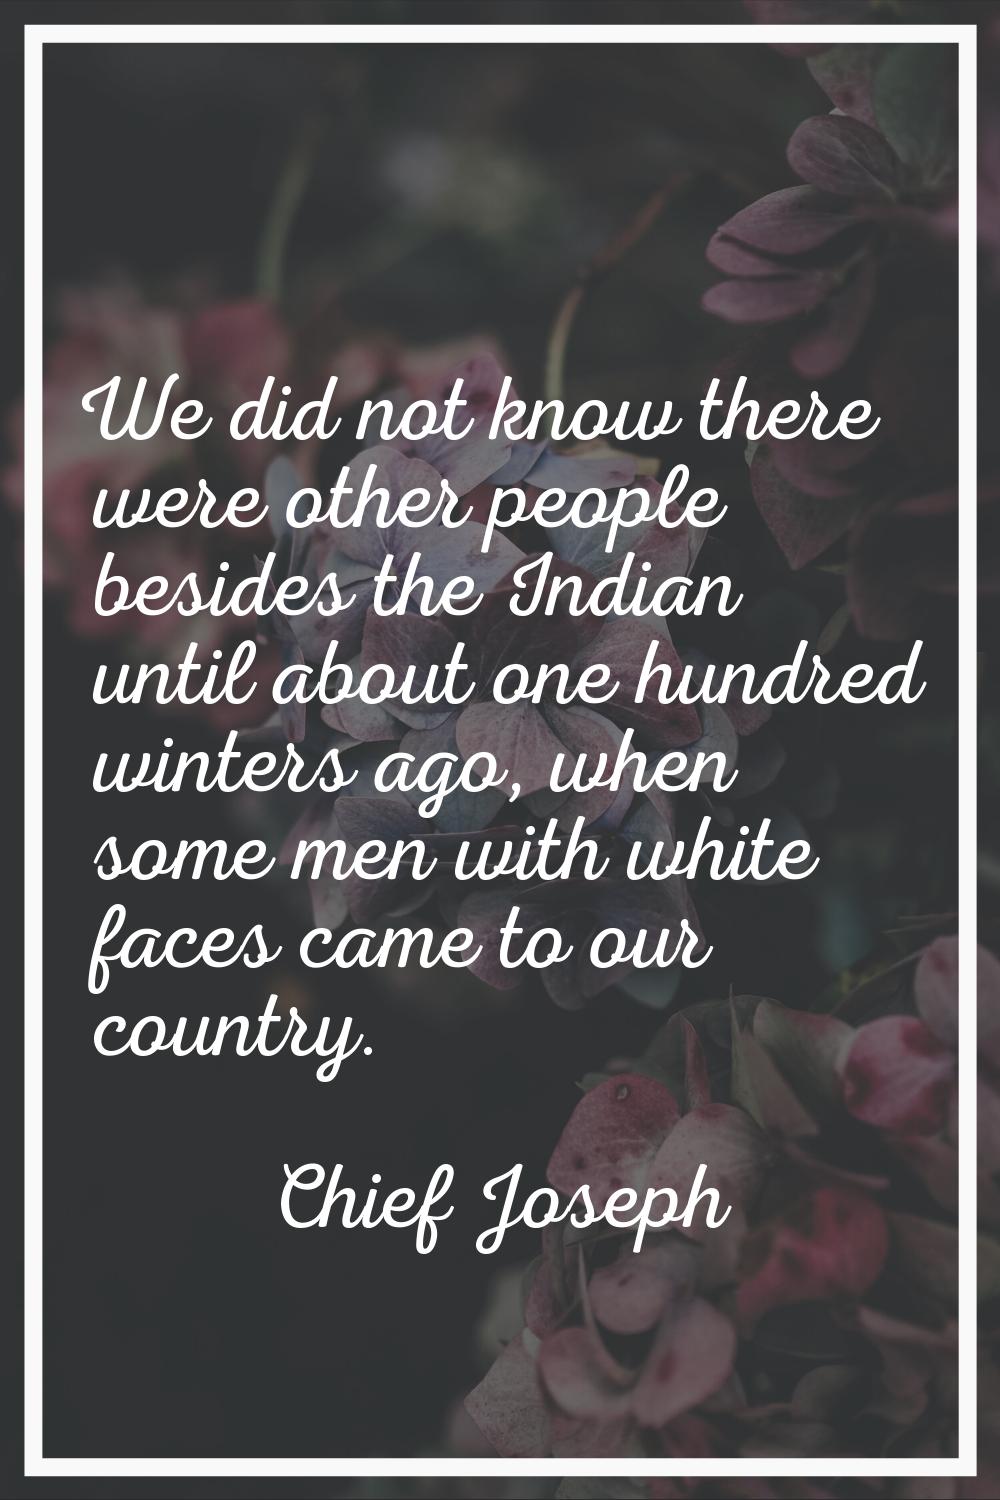 We did not know there were other people besides the Indian until about one hundred winters ago, whe